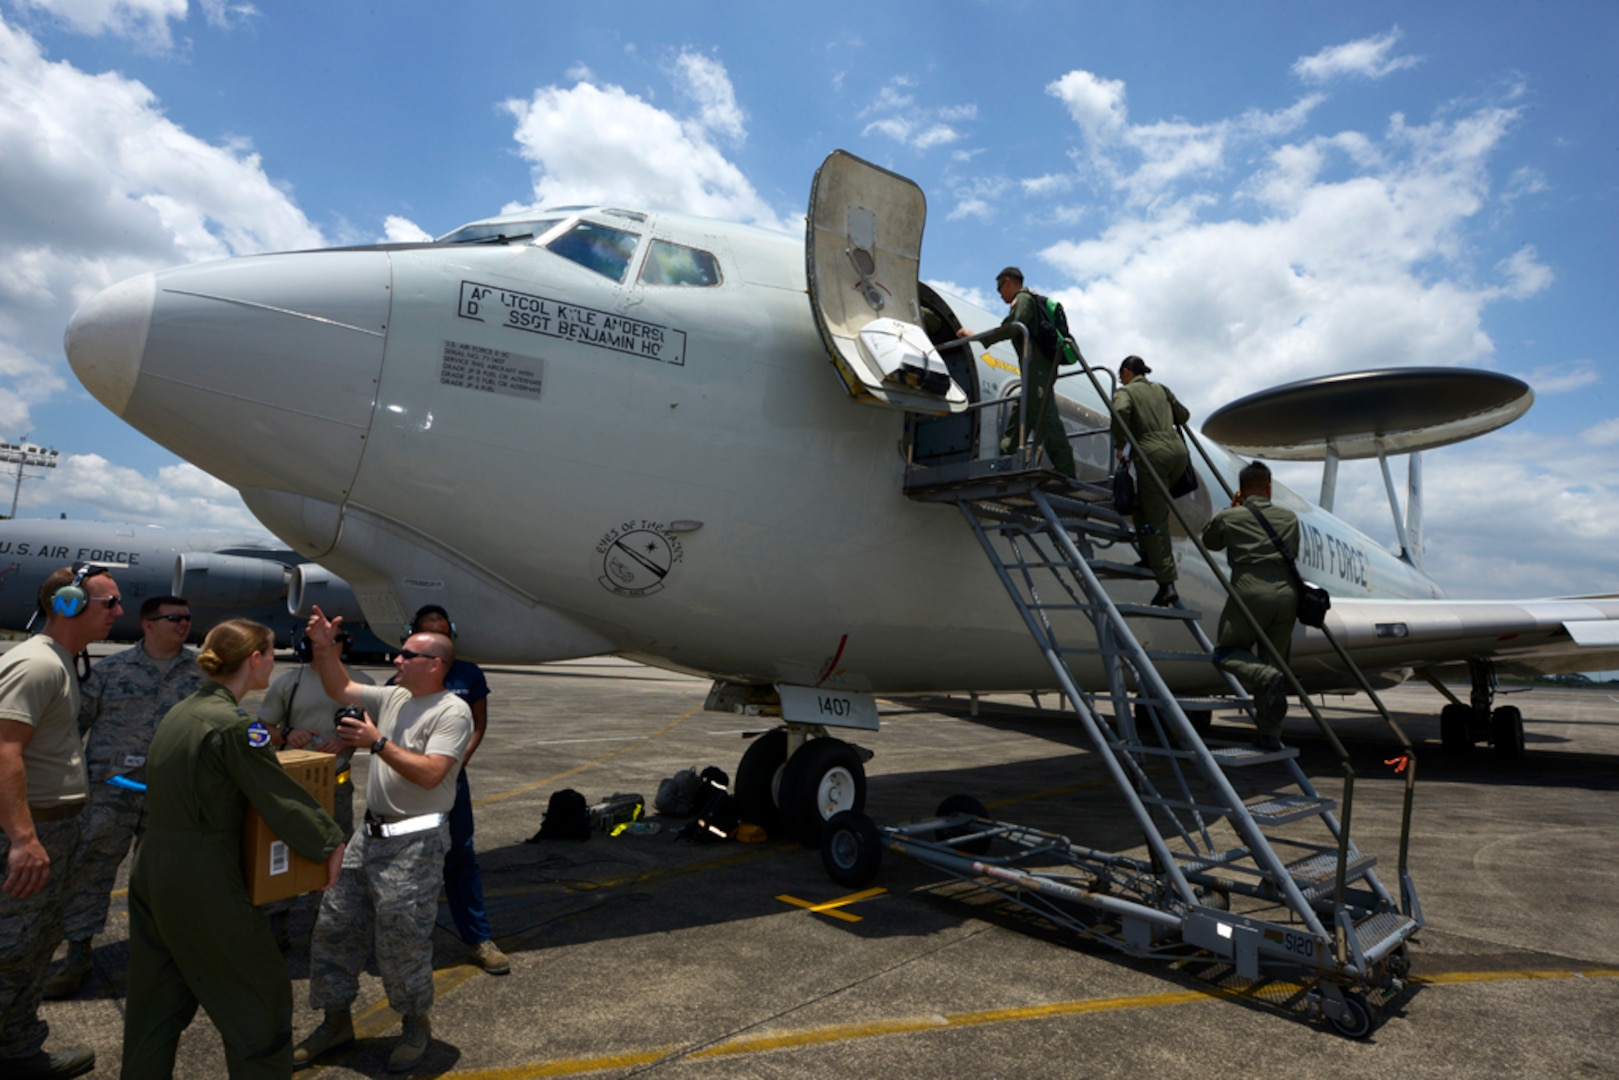 In this photo file, U.S. Air Force Airmen from the 961st Airborne Air Control Squadron and Aircraft Maintenance Unit discuss pre-flight information while Philippine Air Force (PAF) air battle managers board a 961st AACS E-3 Sentry Airborne Warning and Control System (AWACS) during exercise Balikatan 2015 on Clark Air Base, Philippines, April 23. This exercise marks the first time in history that PAF air battle managers have controlled other aircraft while onboard the AWACS. Since the exercise began, April 20, the 961st AACS has integrated 20 PAF weapons controllers during their missions to provide them with first-hand experience using the aircraft’s systems. The 961st AACS is stationed at Kadena Air Base, Japan. 